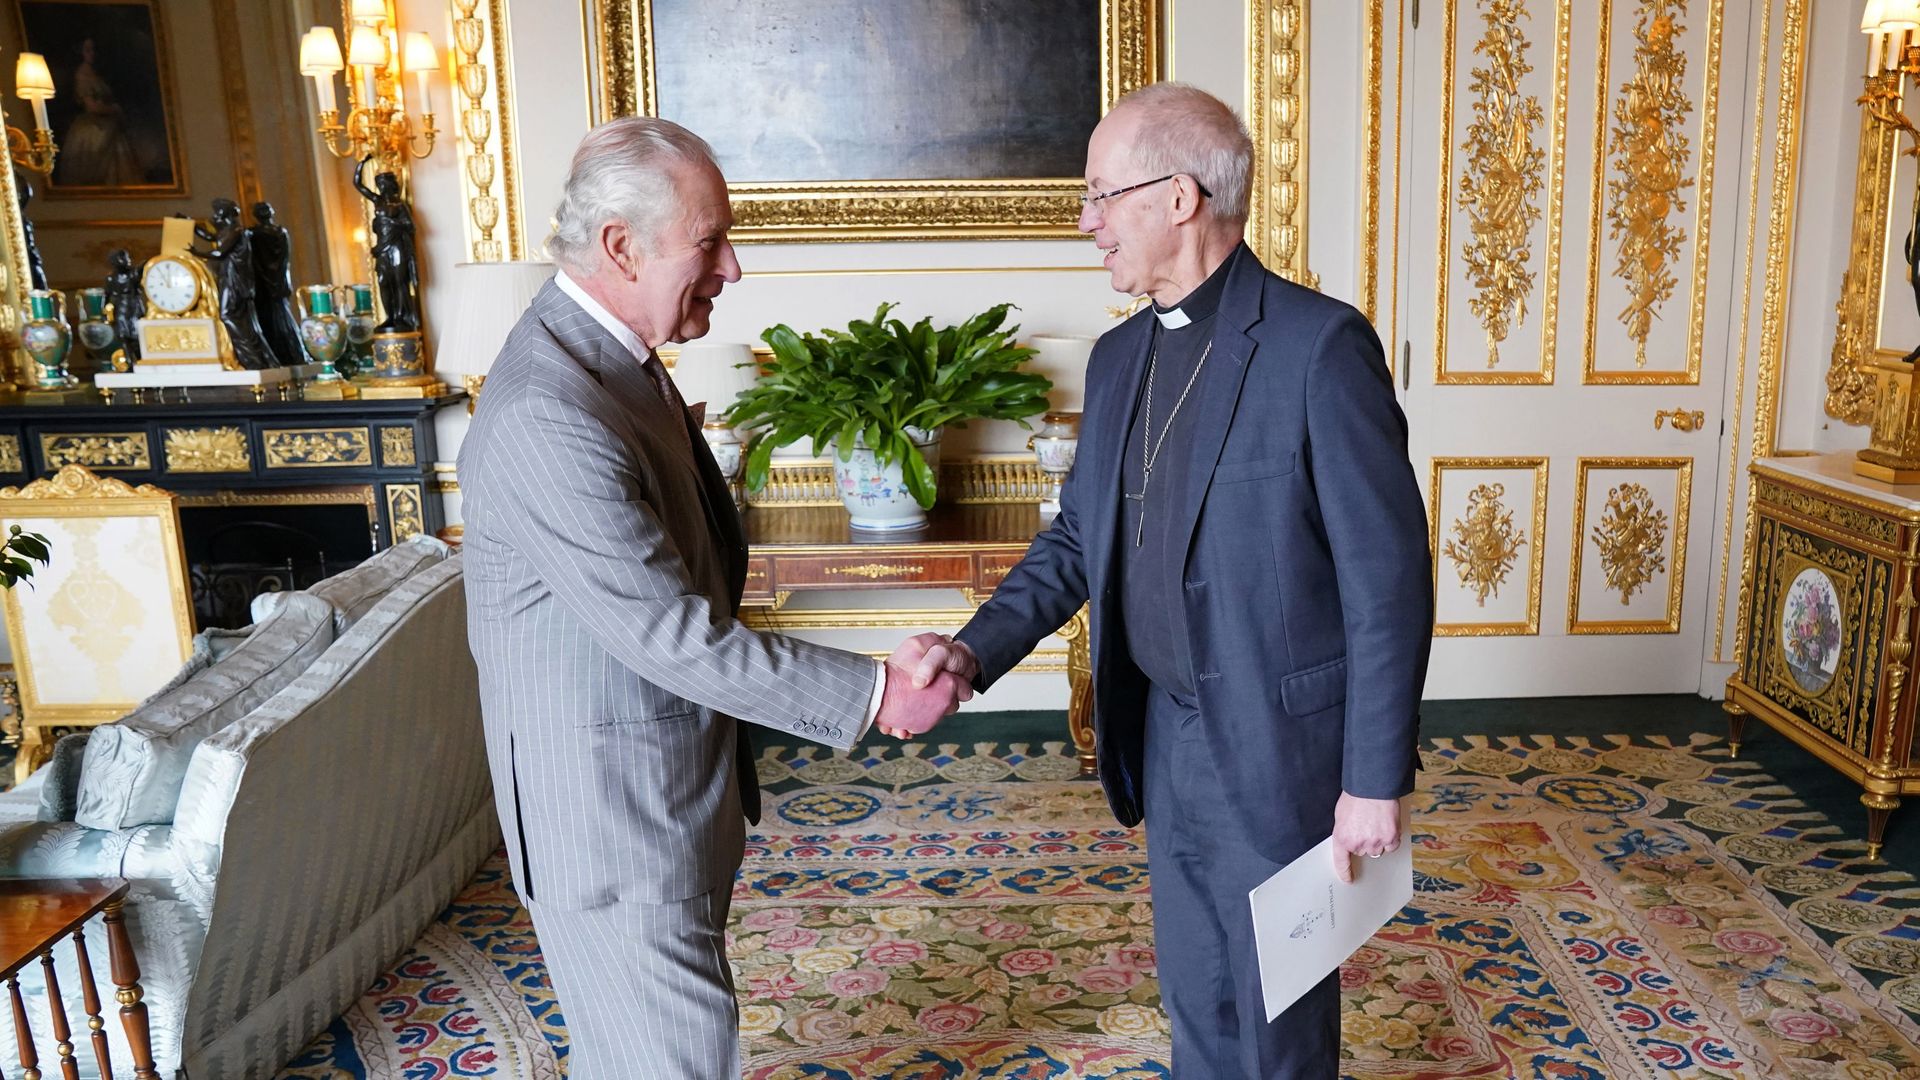 King Charles shaking the hand of the Archbishop of Canterbury inside the White Drawing Room